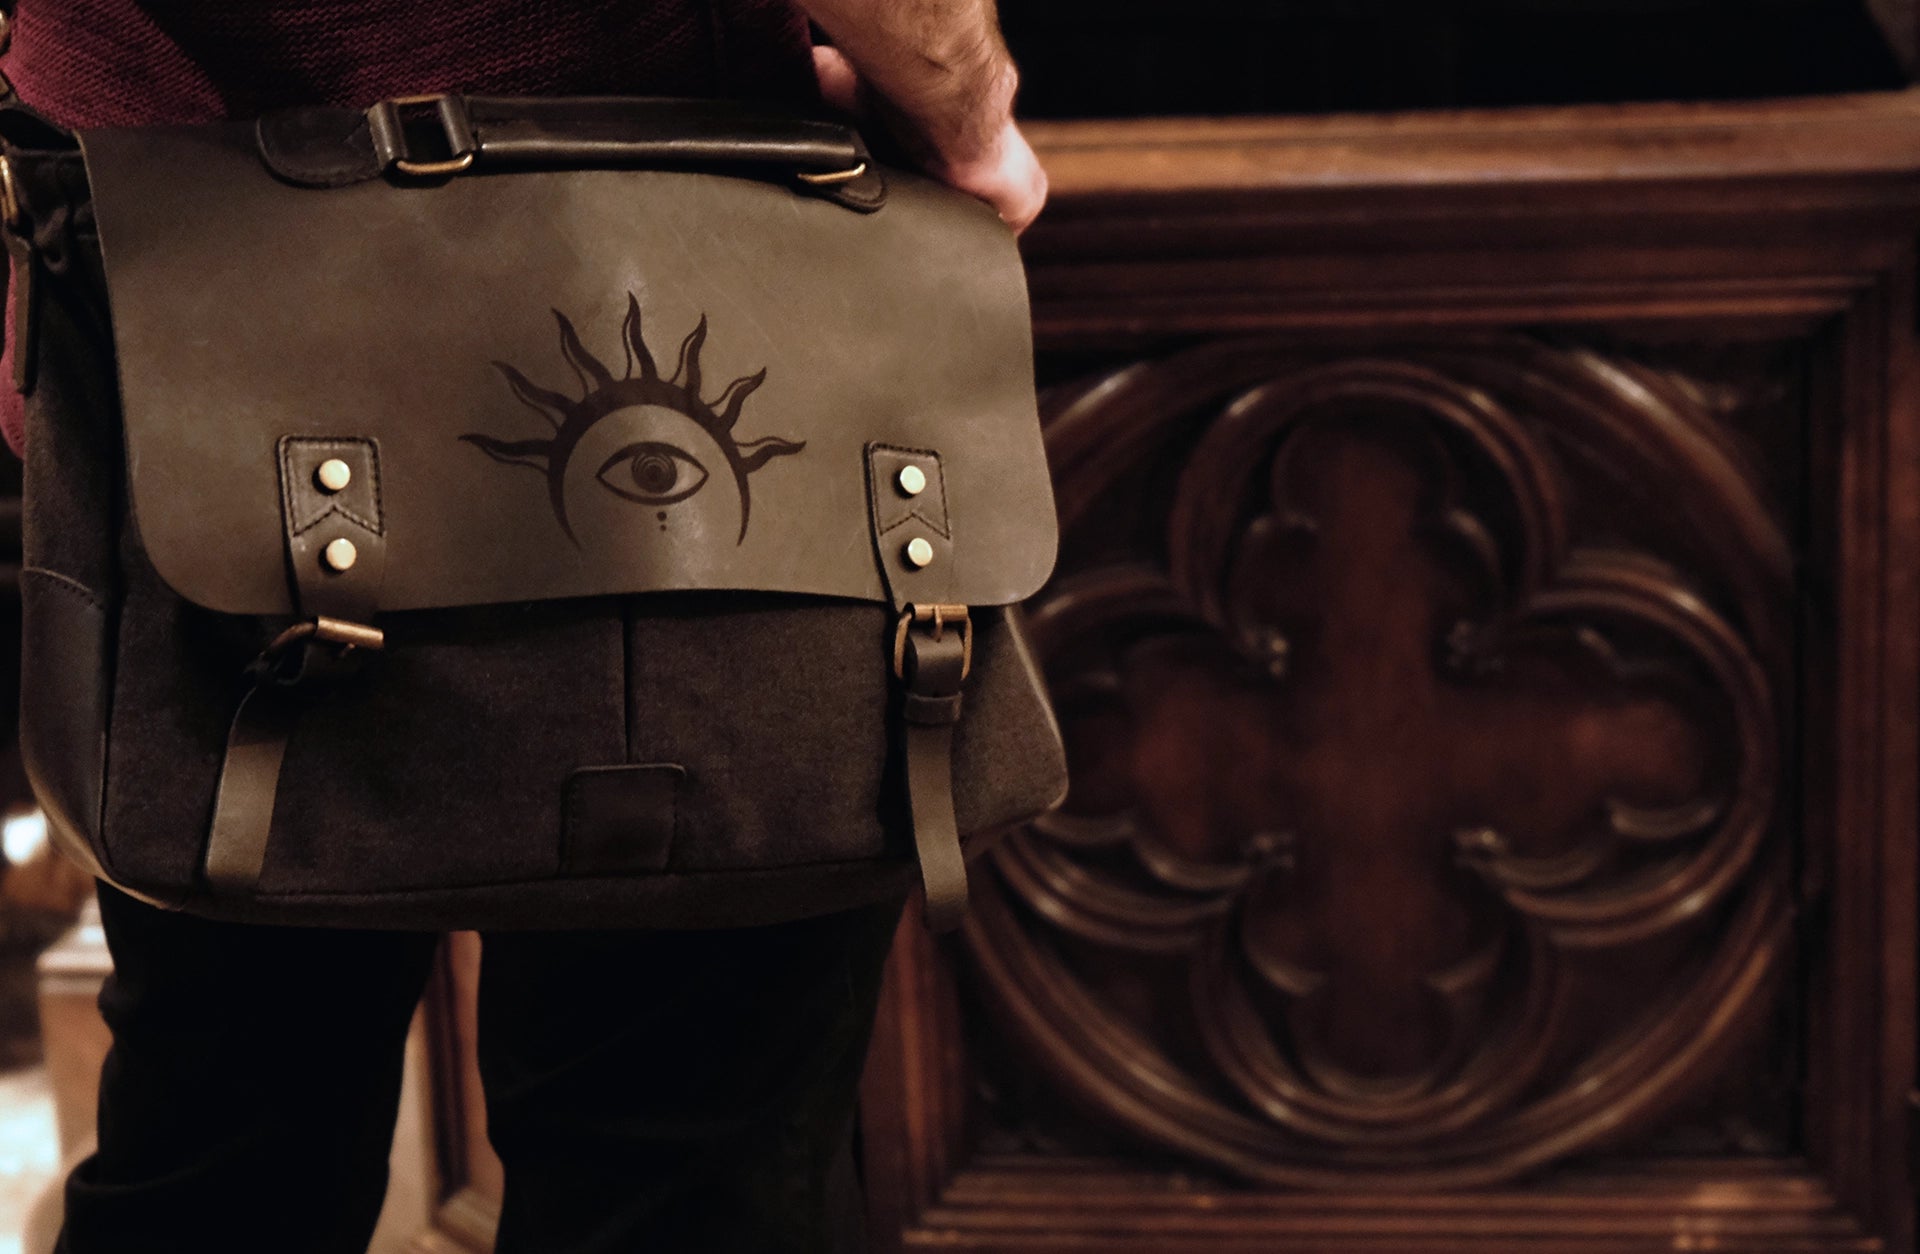 A model is wearing a black leather satchel engraved with a mystic eye with a solar crown. Dark academia style